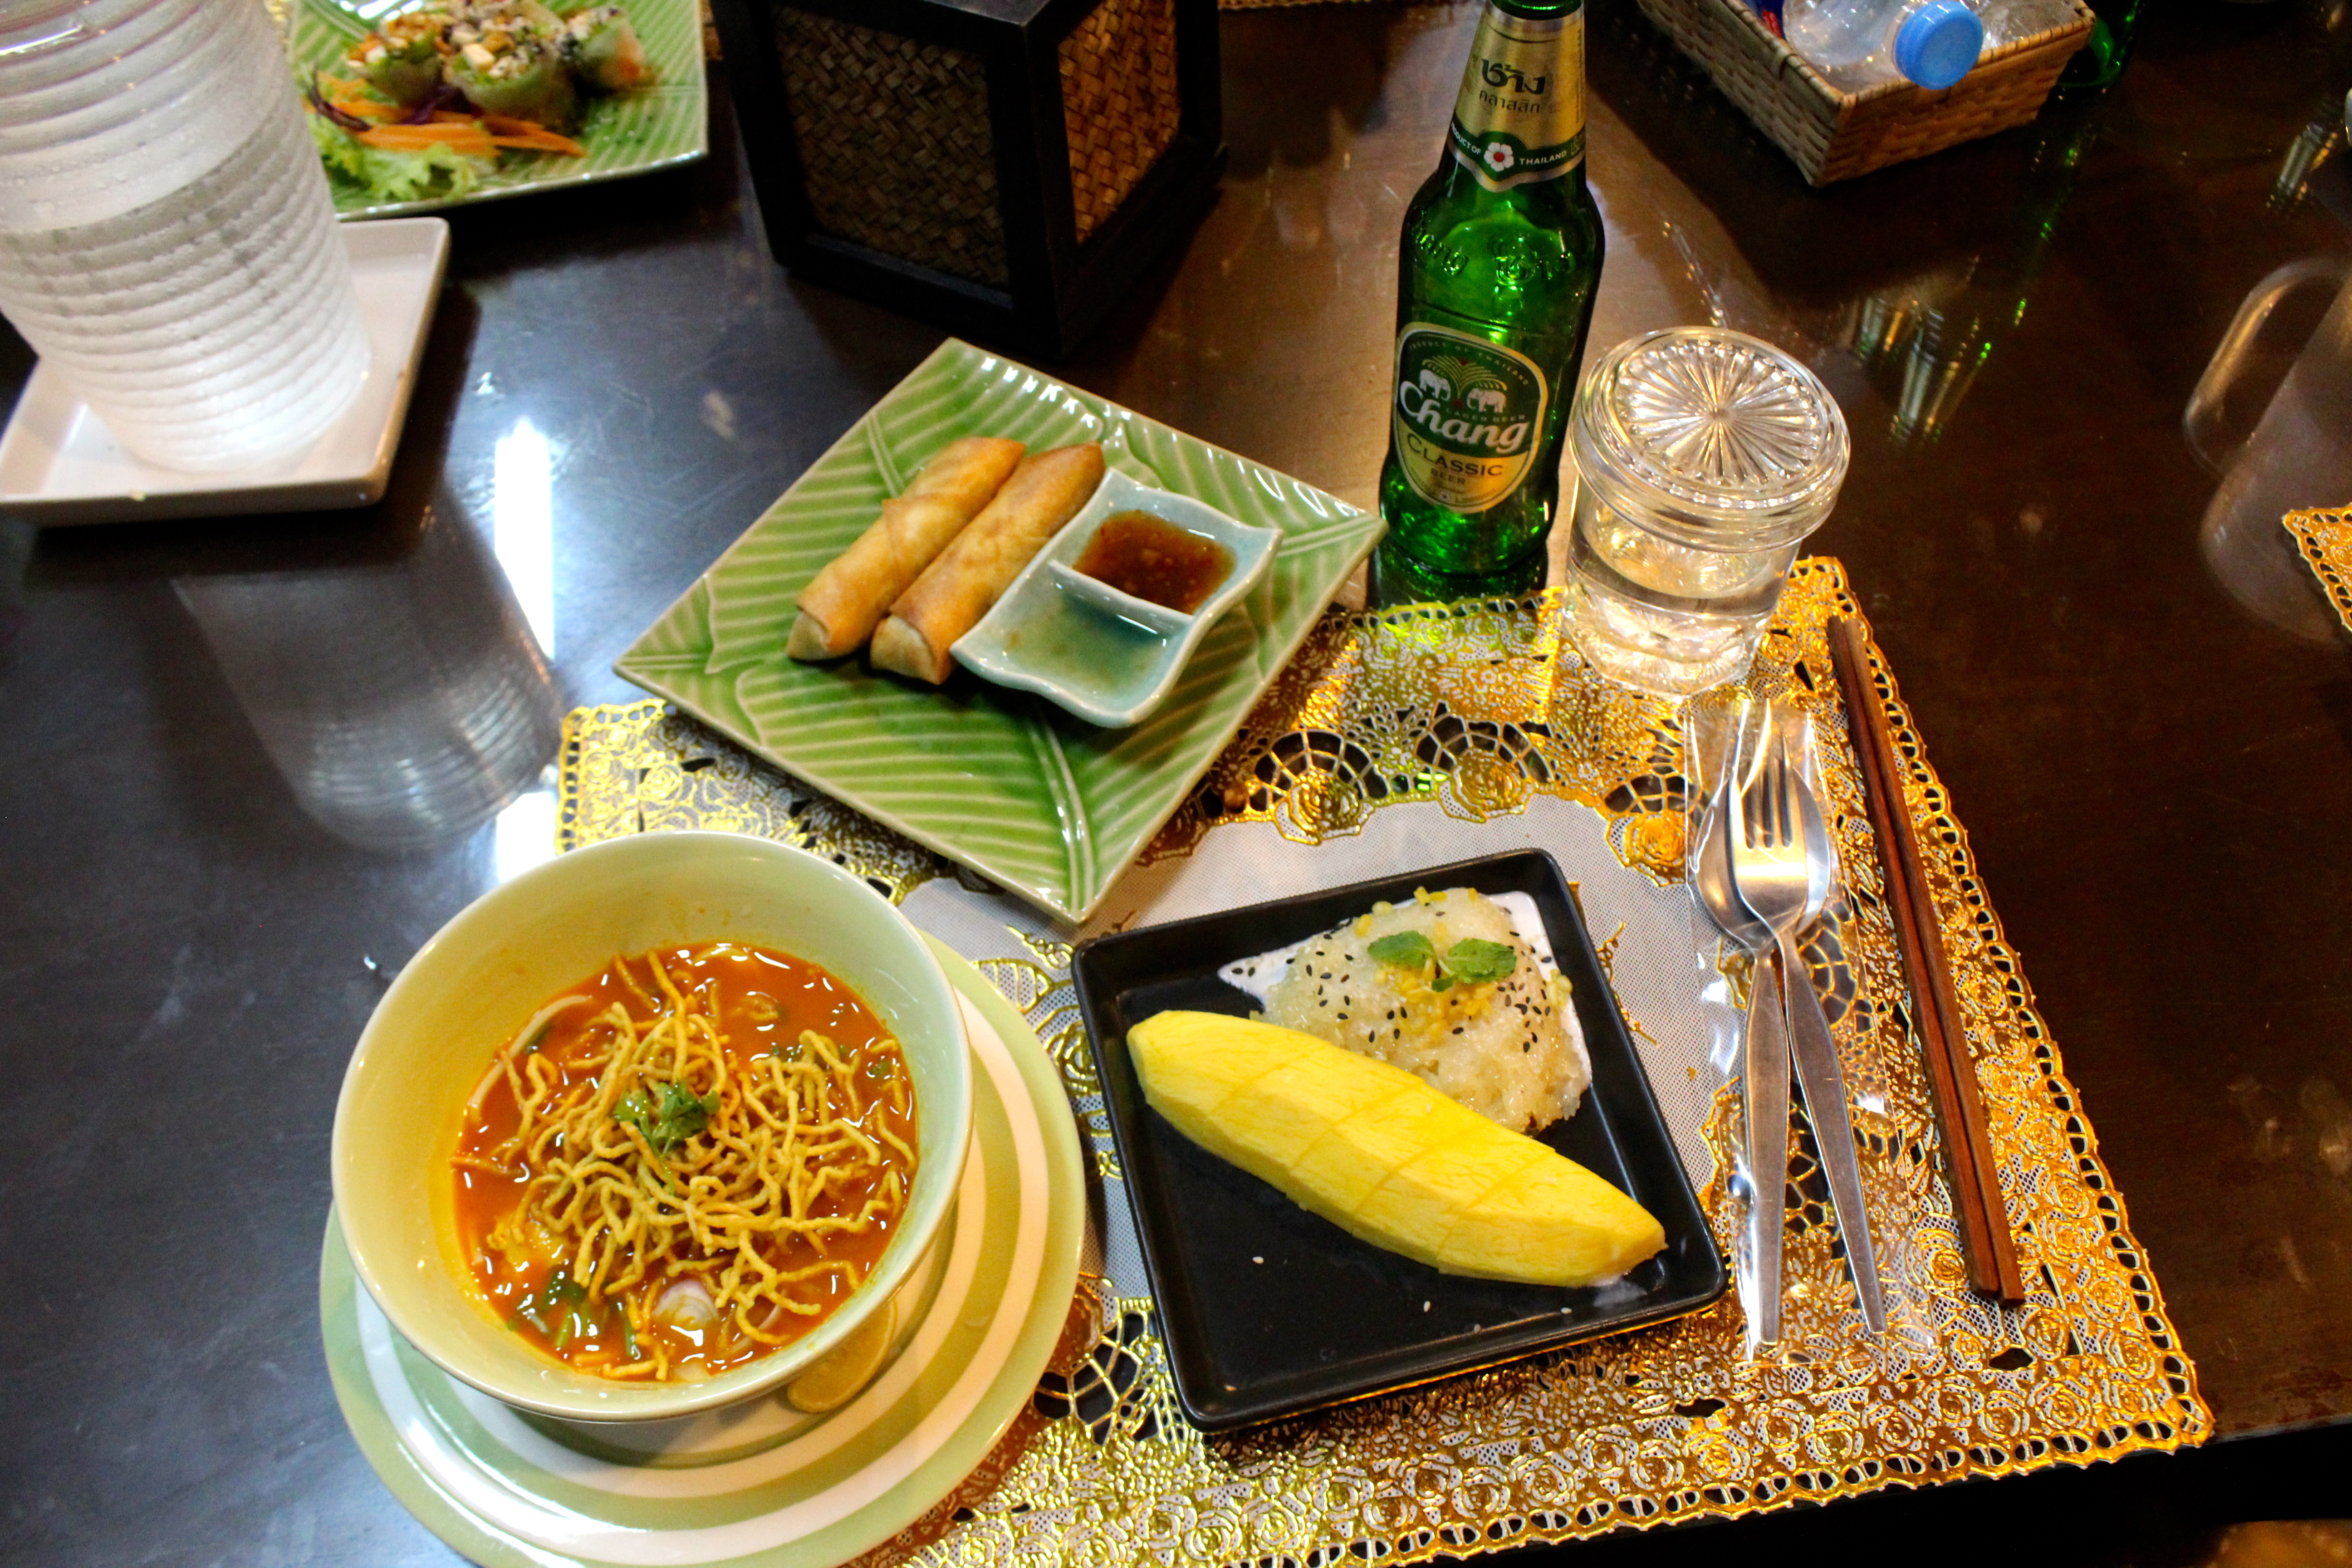 Spring Rolls, Khao Soi, and Mango Sticky Rice made by yours truly at Zabb E Lee Cooking School.